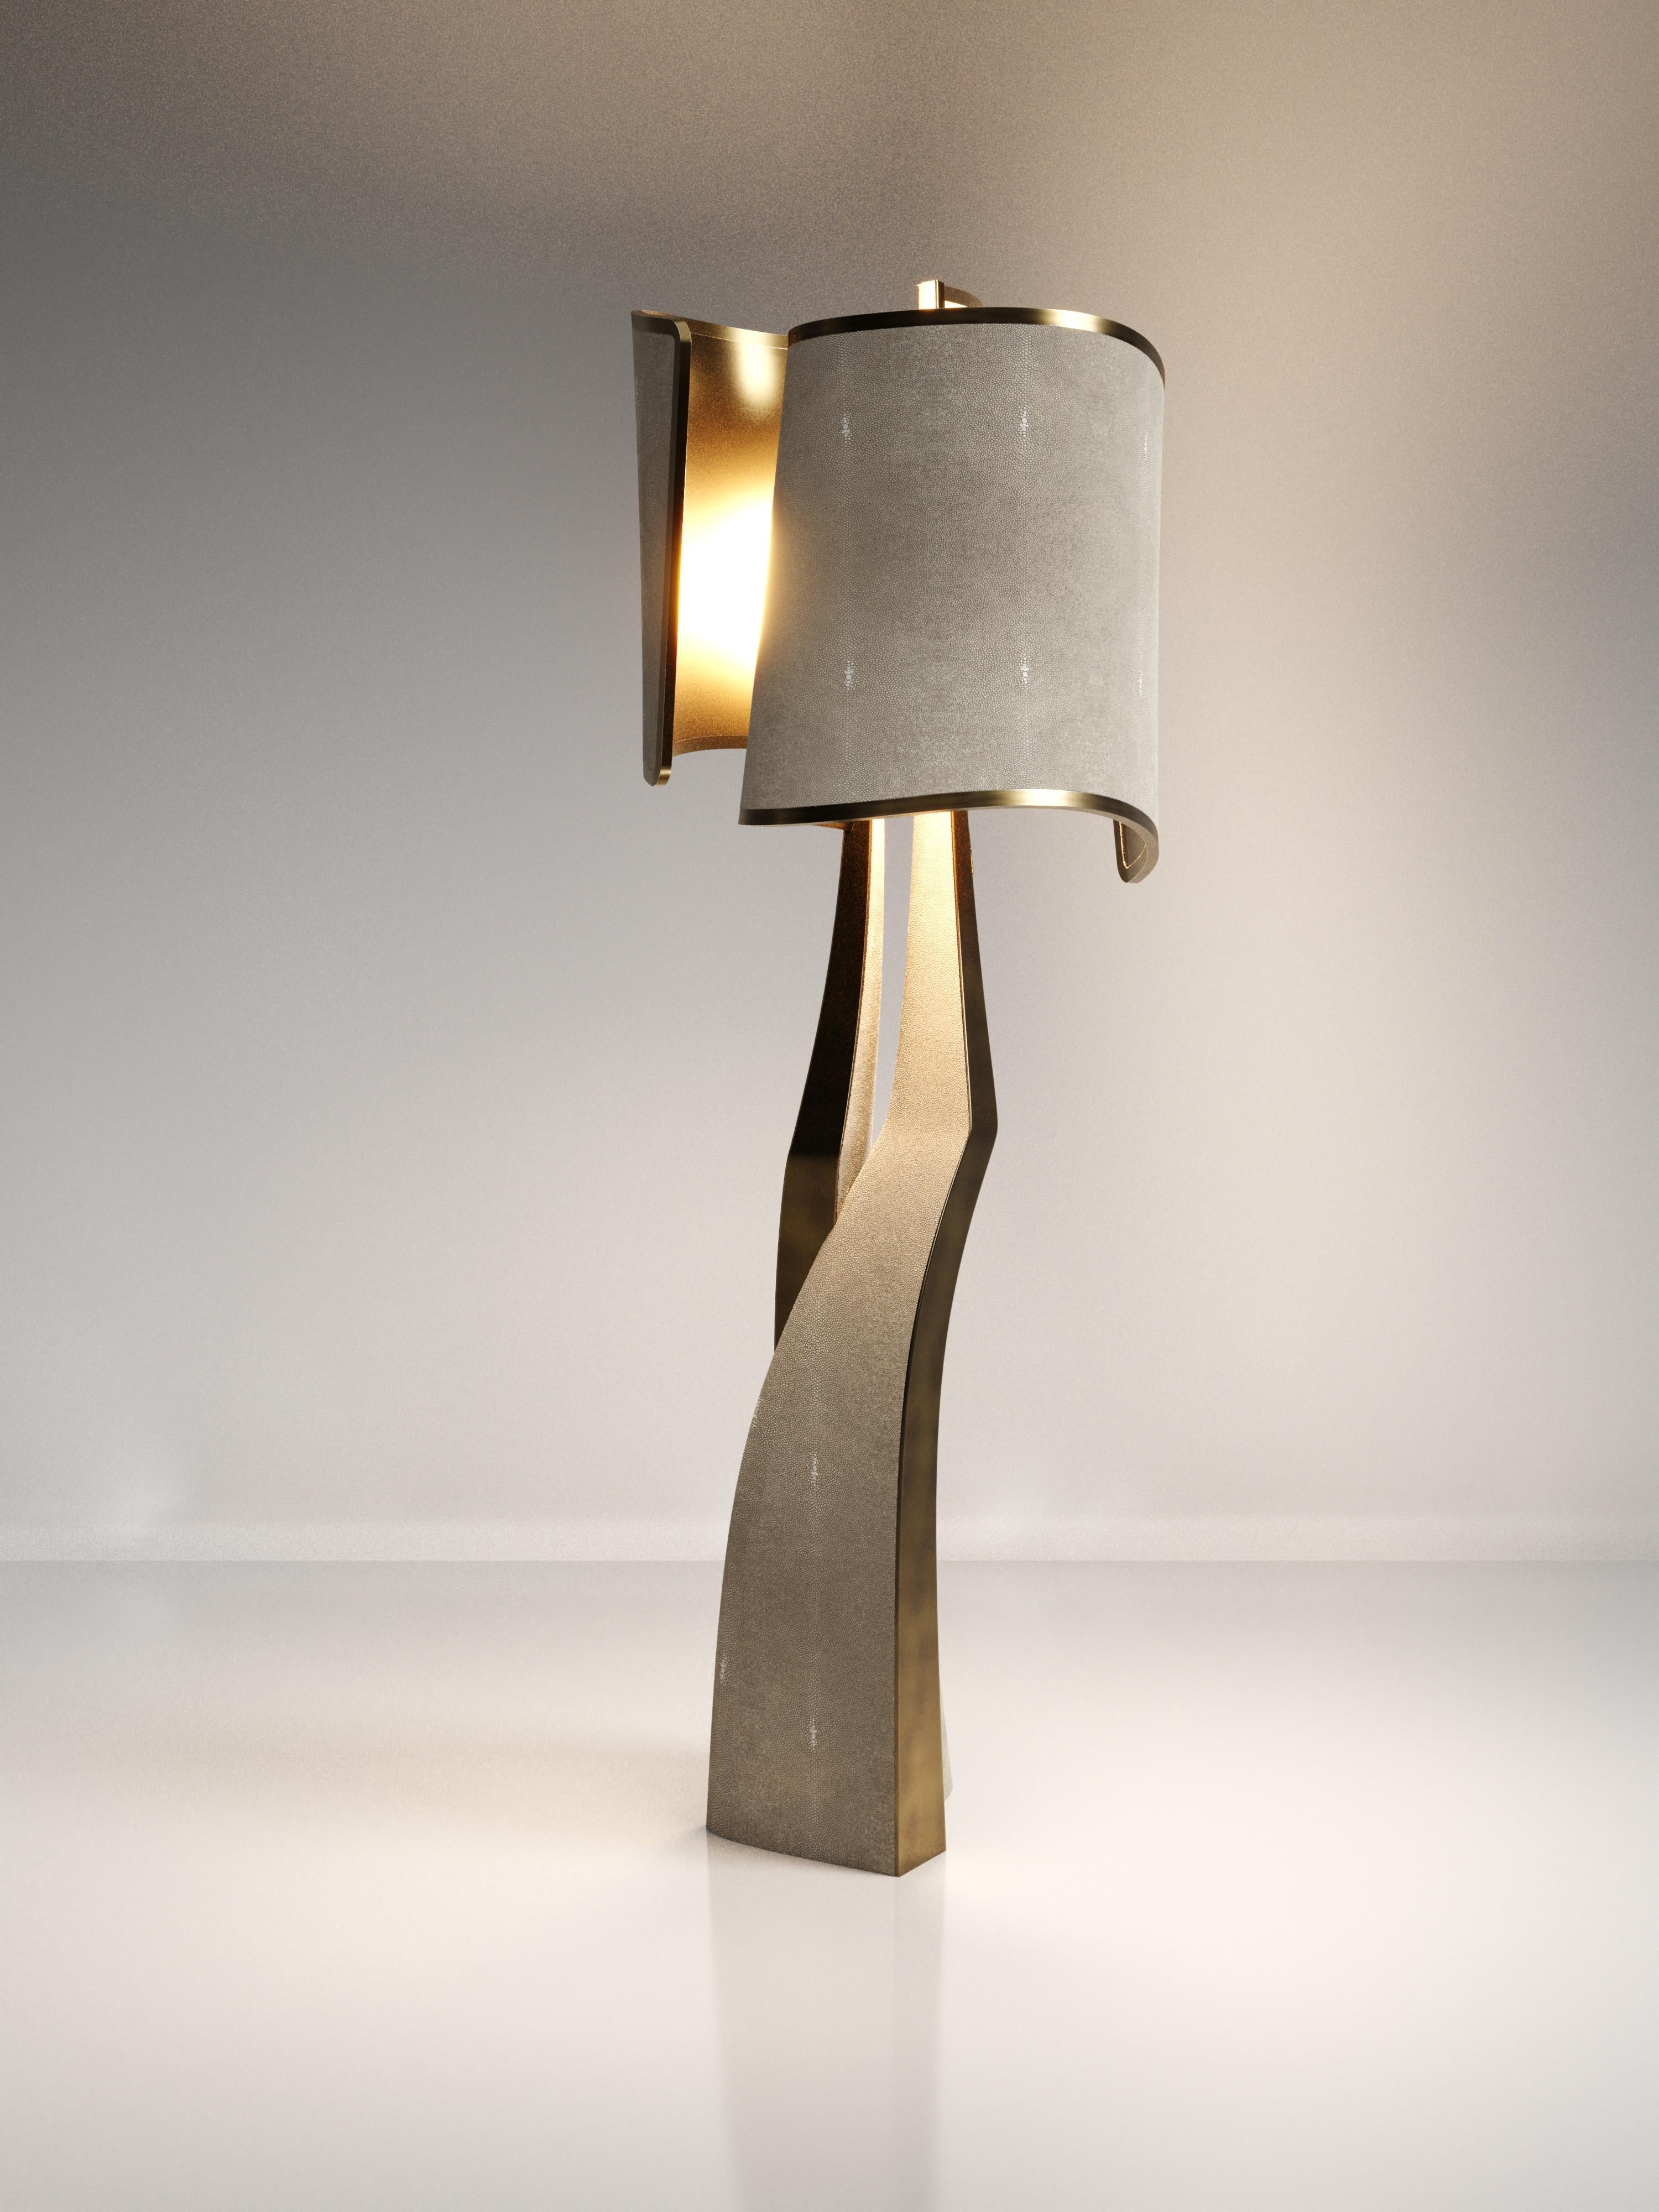 Art Deco Sculptural Floor Lamp in Shagreen Inlay and Bronze-Patina Brass by Kifu Paris For Sale